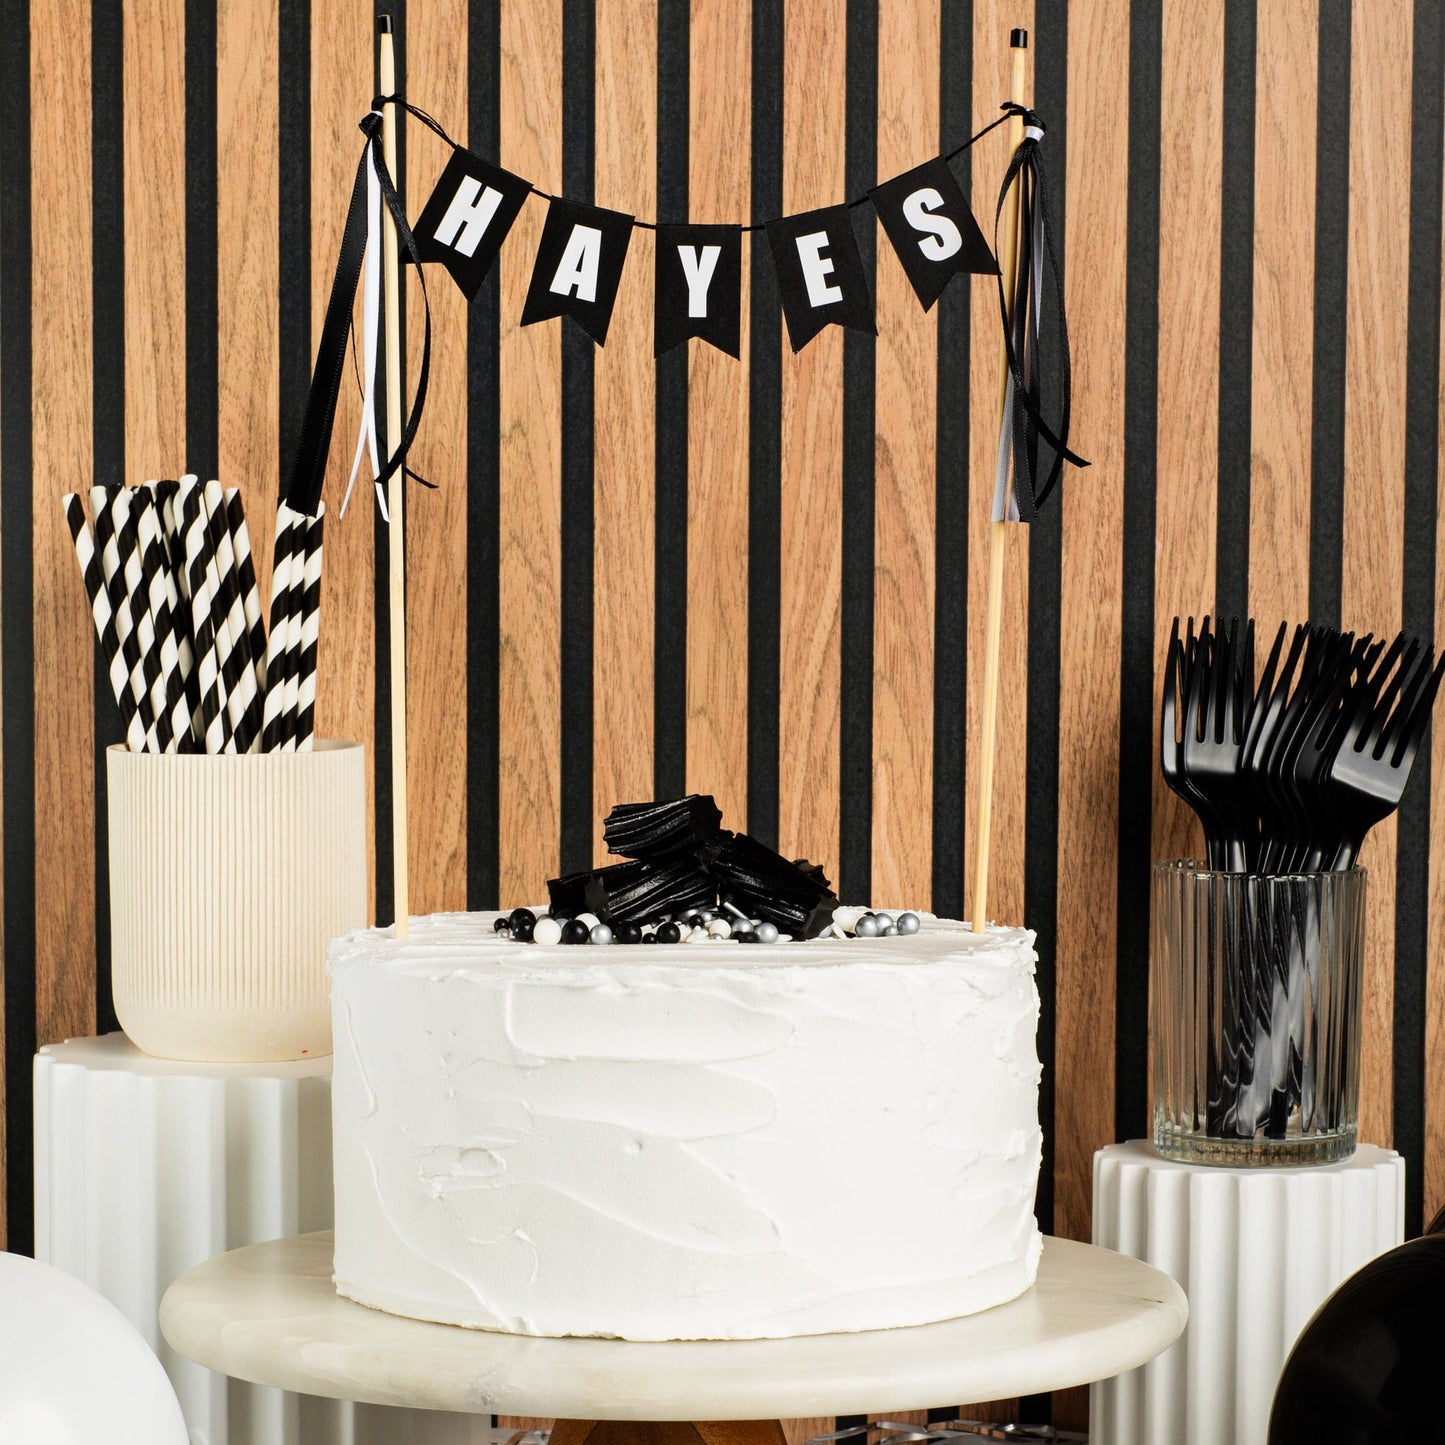 
                  
                    black and white personalized name cake topper for birthday | personalized cake toppers by Avalon Sunshine
                  
                